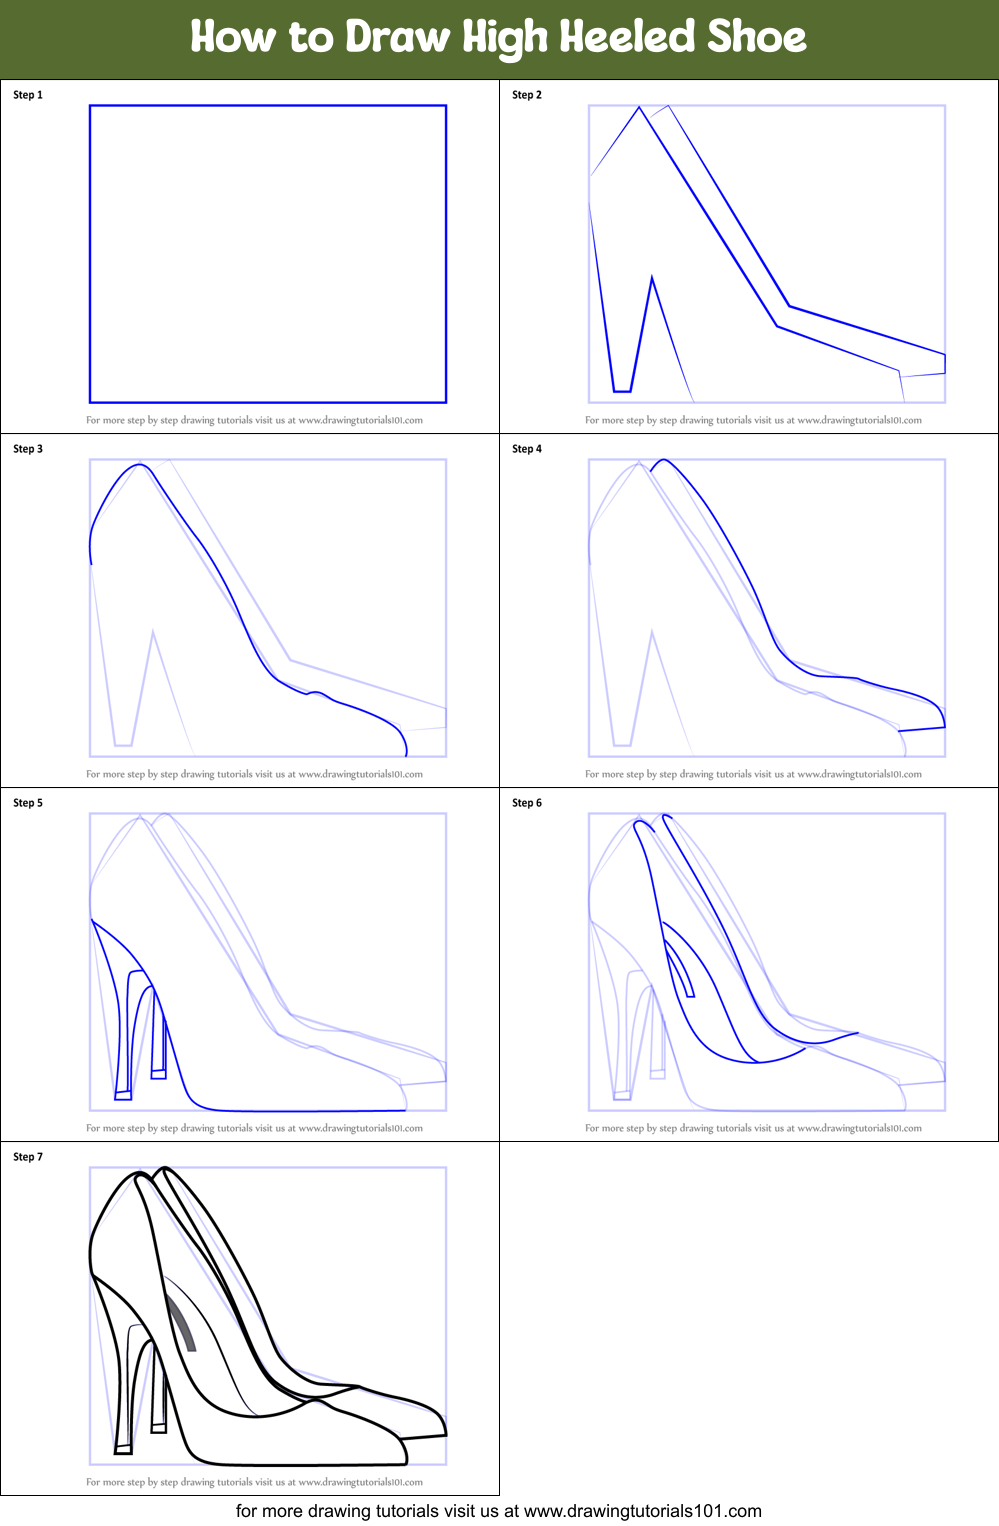 How to Draw High Heeled Shoe printable step by step drawing sheet